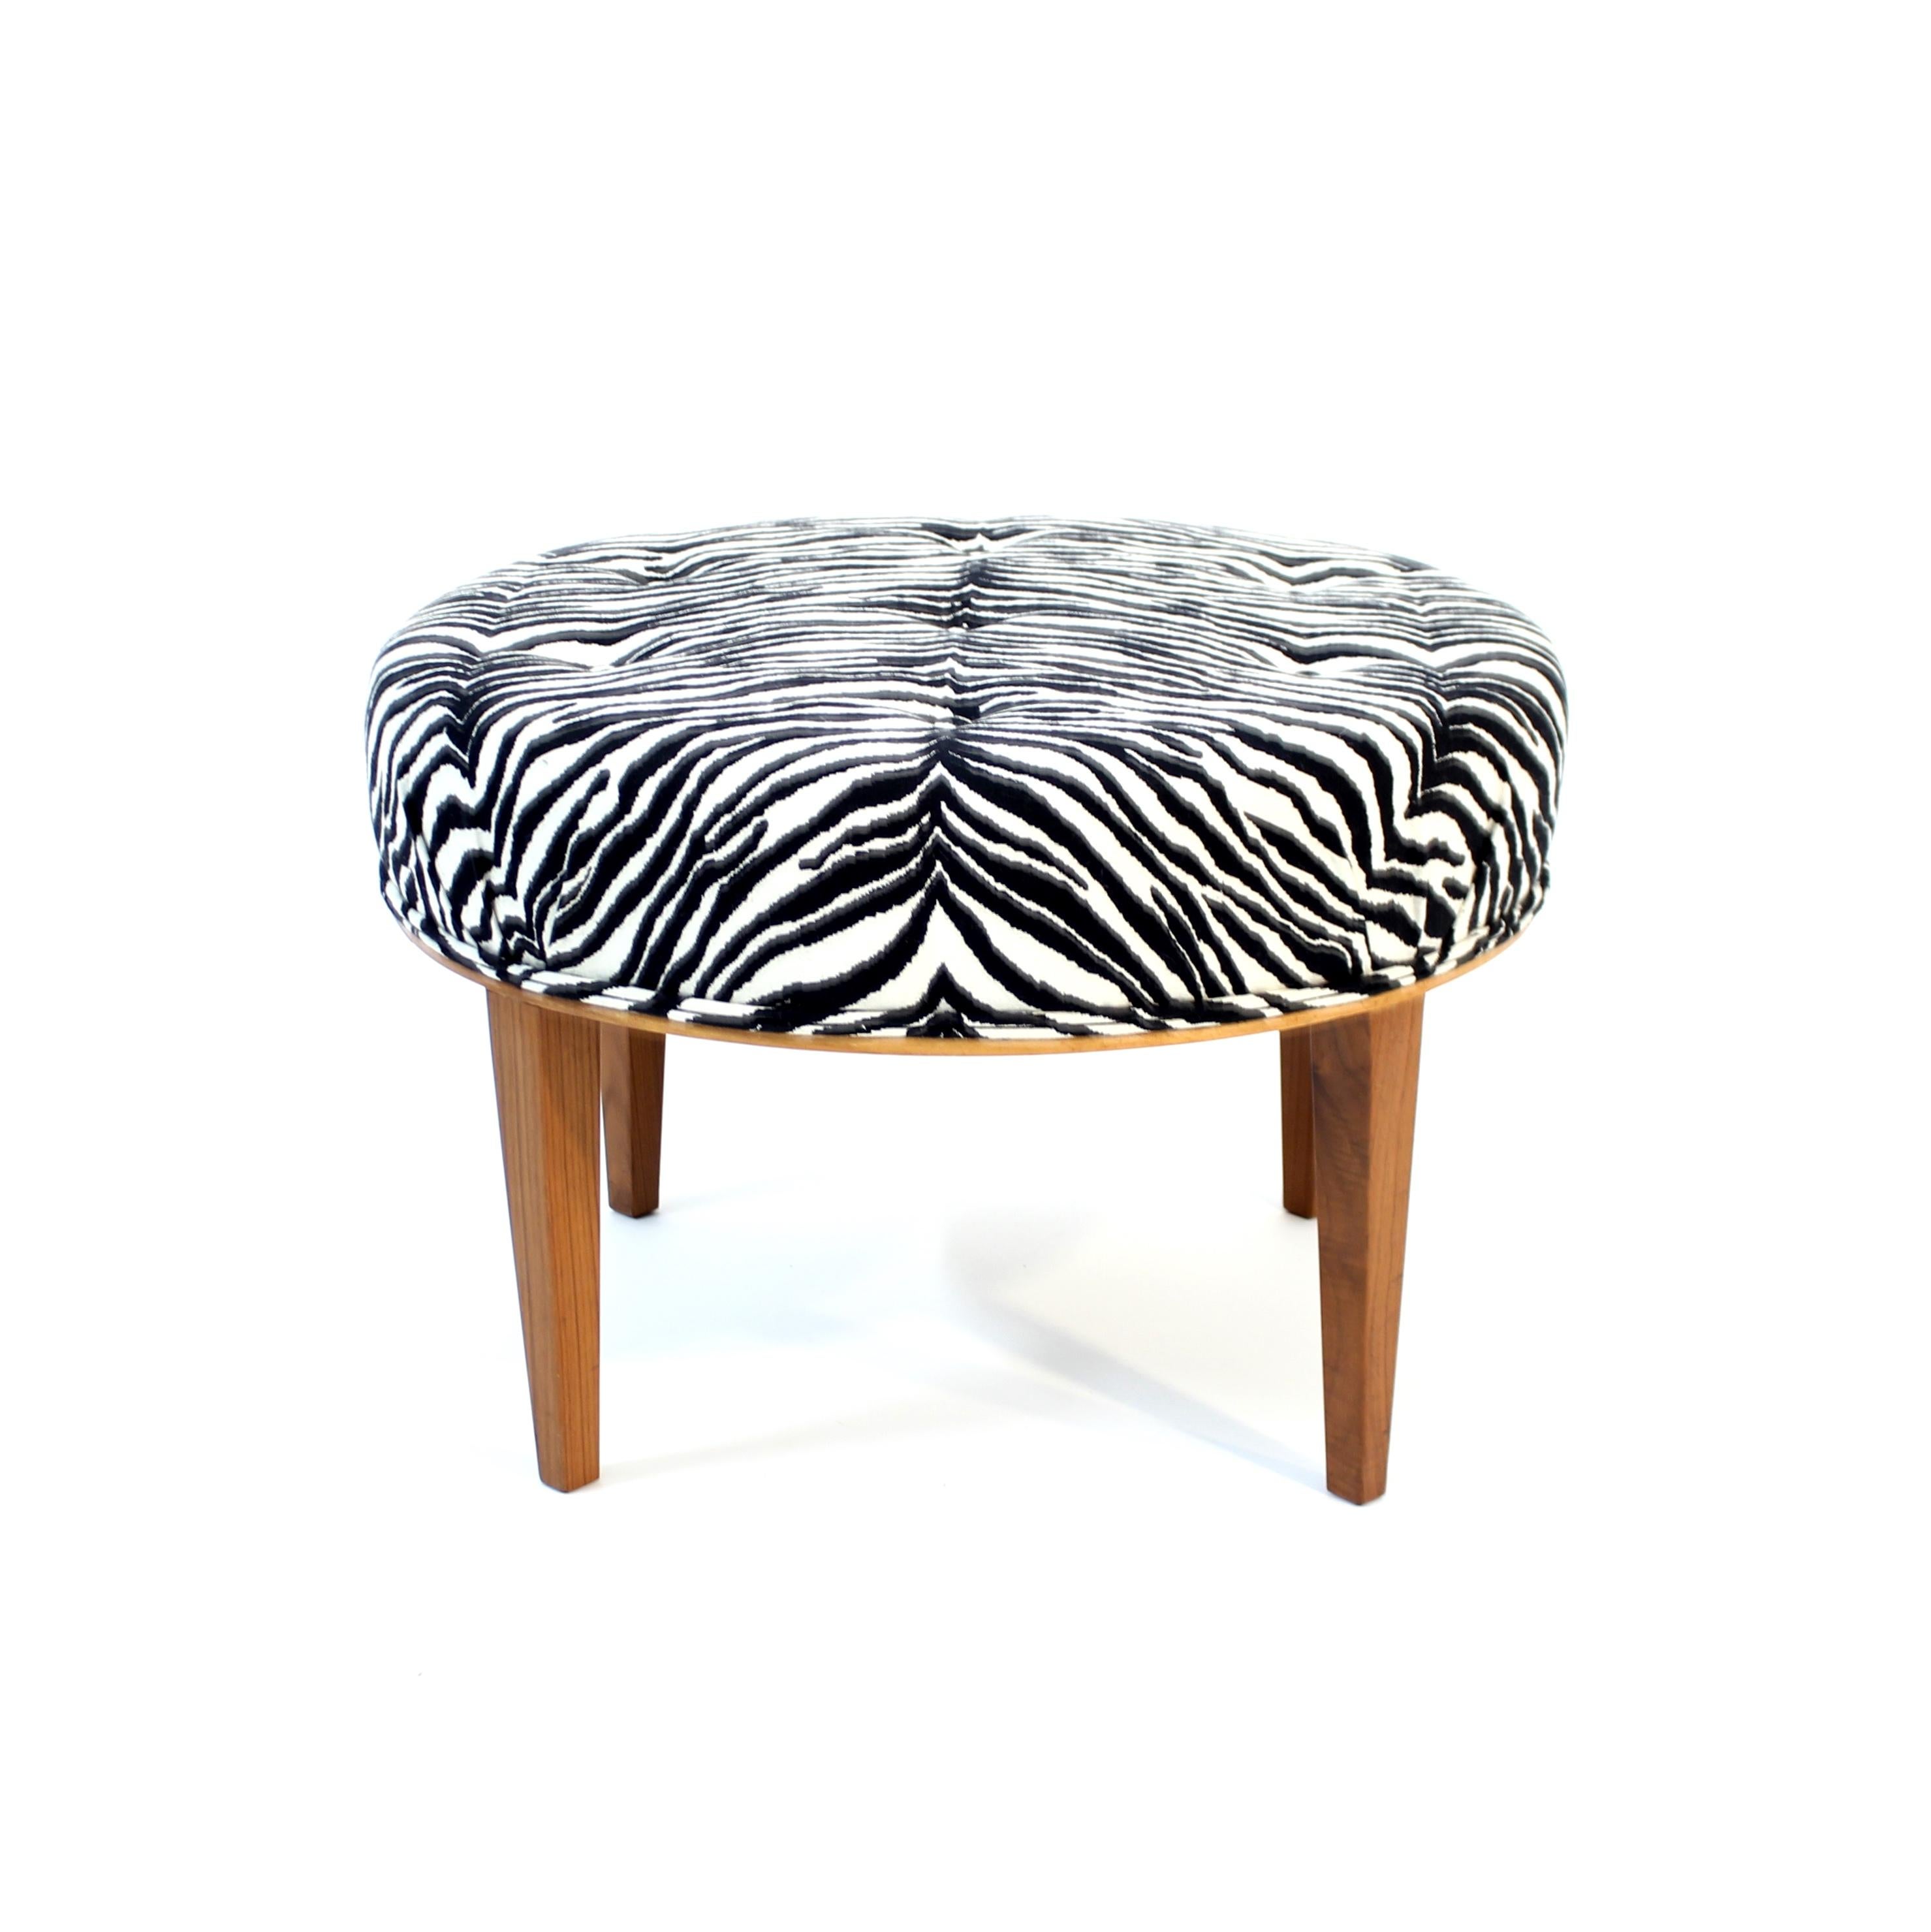 Stool or foot stoll designed by Josef Frank in 1936 for Svenskt Tenn. This example dates back to the late 1970s and was originally ordered by a hotel in Uppsala, Sweden. Legs made of Walnut and the seat is newly reupholstered with a Zebra patterned